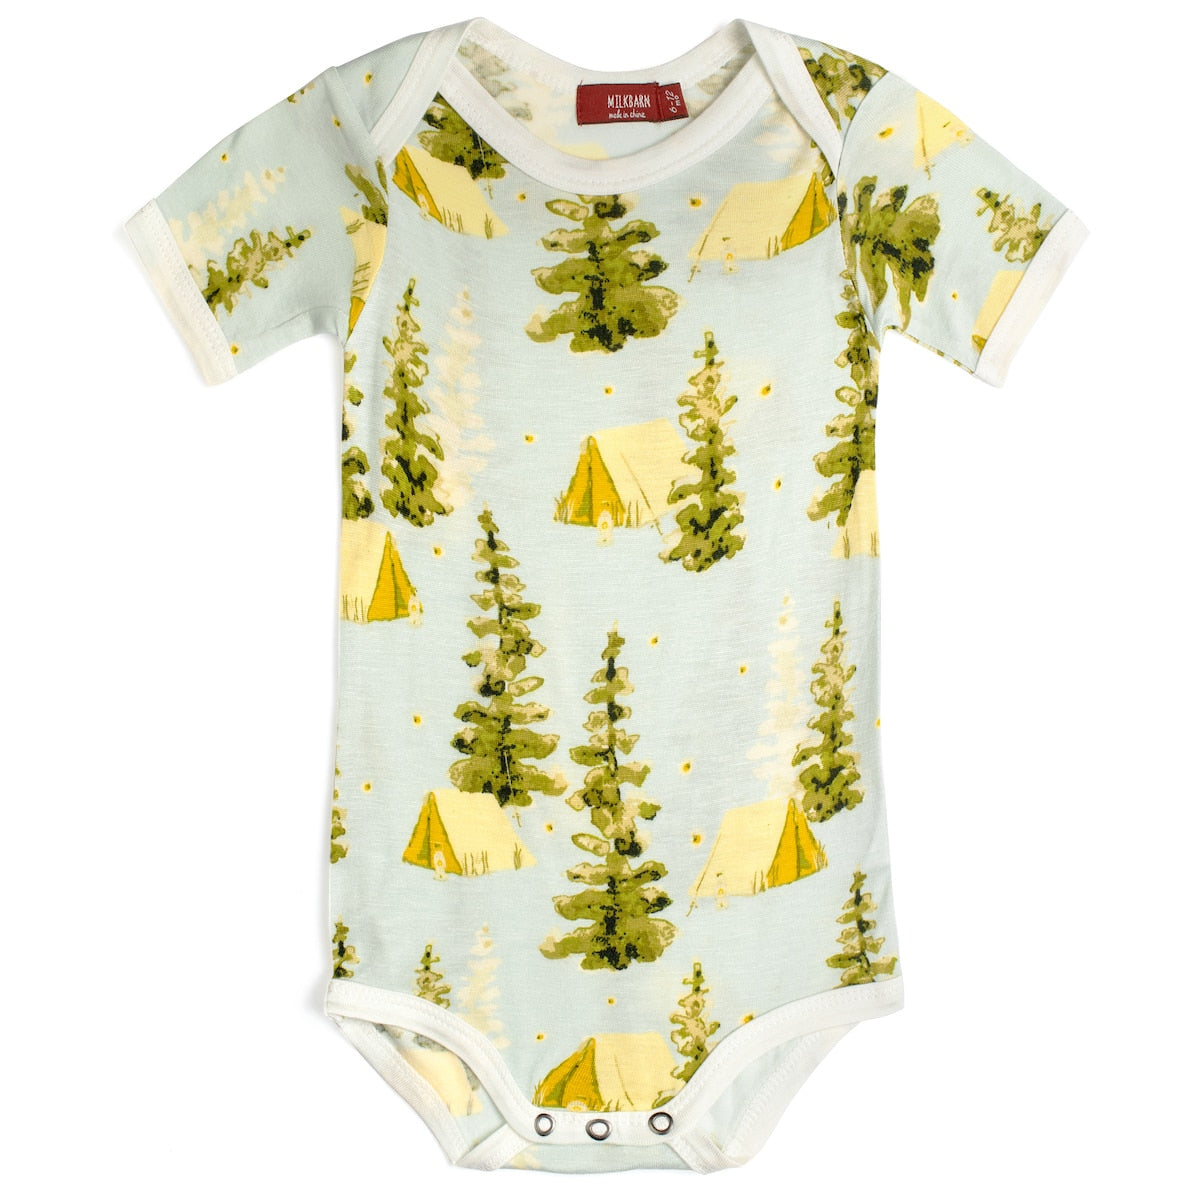 light blue onsie with all-over pattern of forest trees and tents.